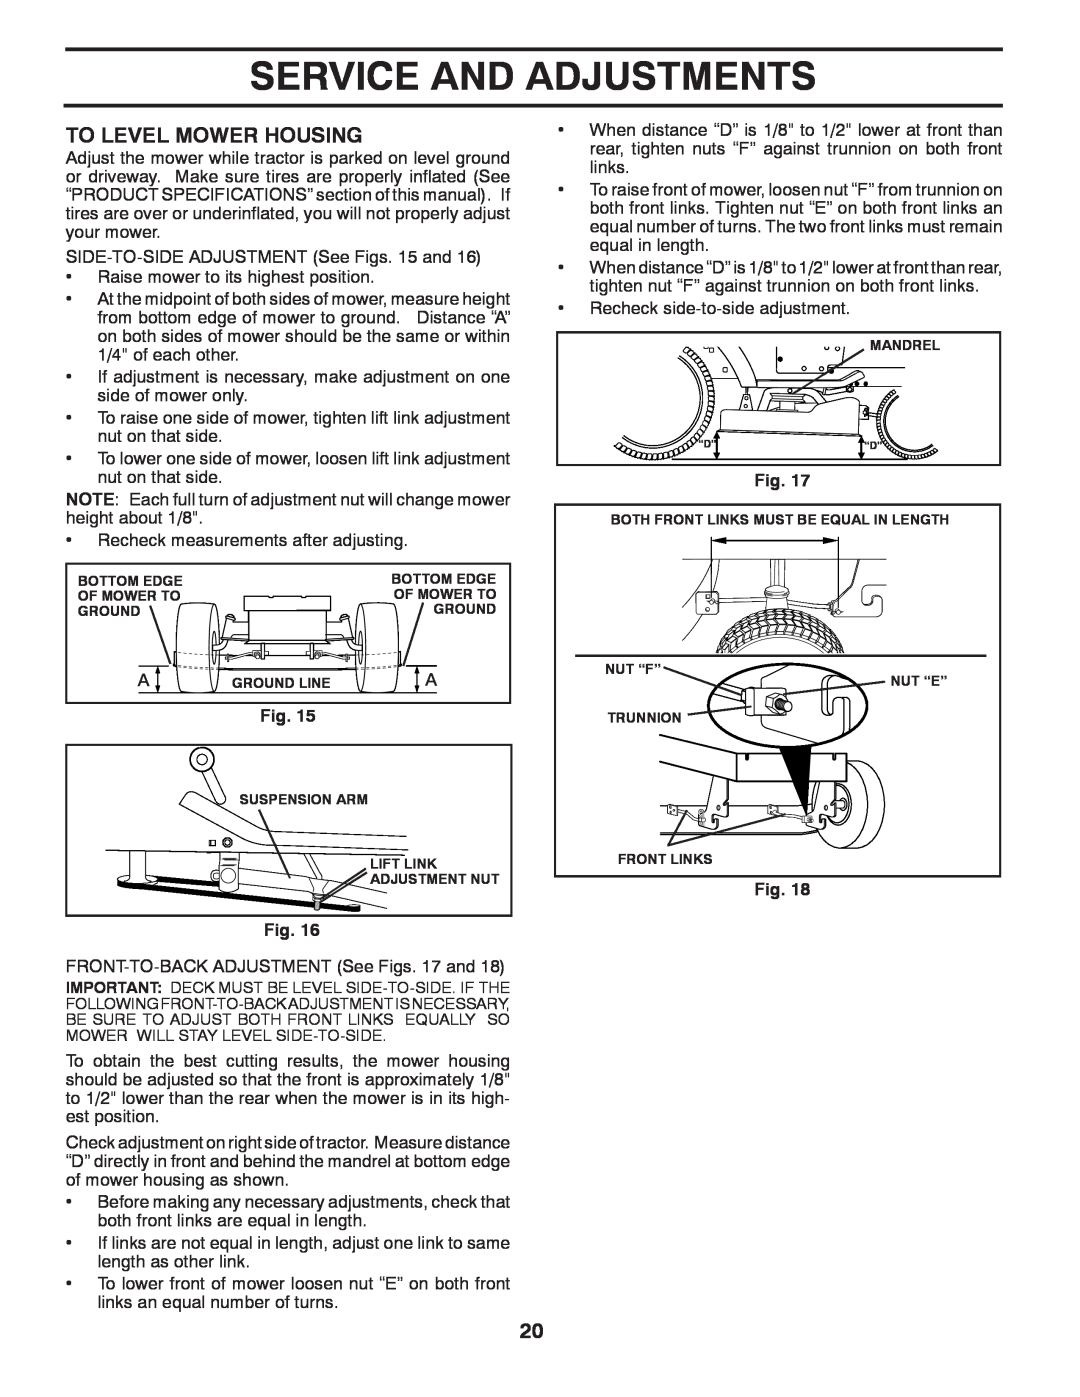 Poulan 532 43 88-98, 96018000400 manual To Level Mower Housing, Service And Adjustments 